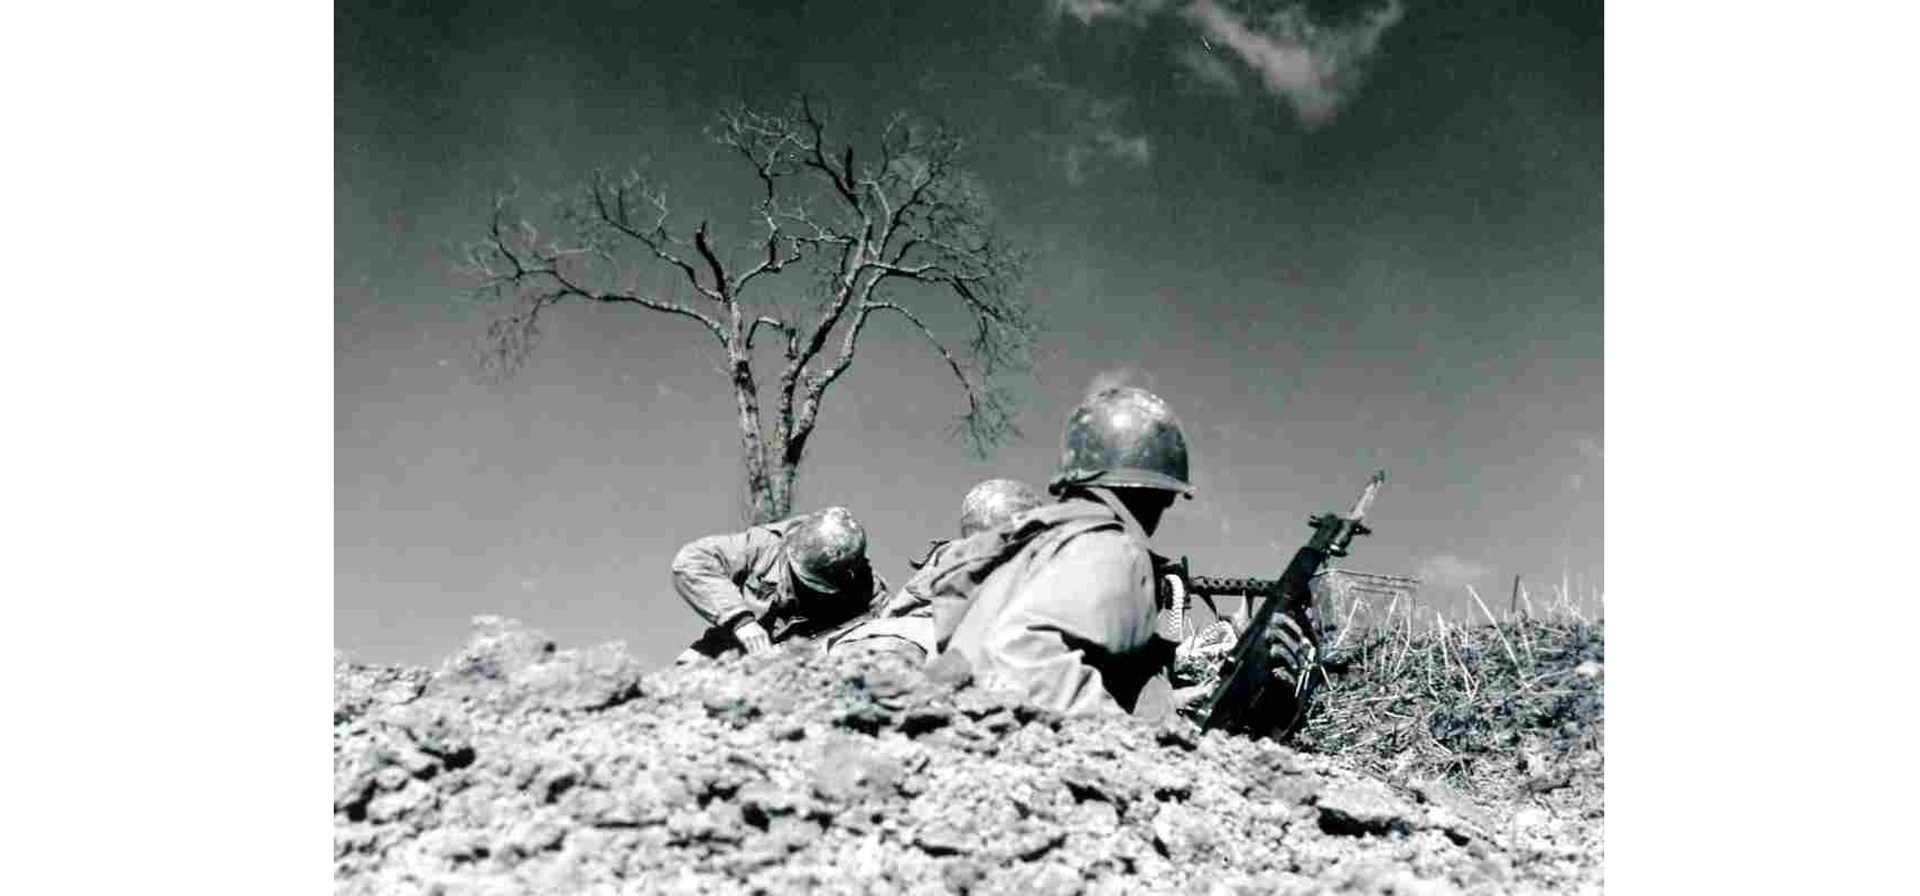 Use of the bayonet was rare, but when it was used the positive effects on American morale and fighting spirit was highly valuable. With the 10th Mountain Division in Italy during early 1945.